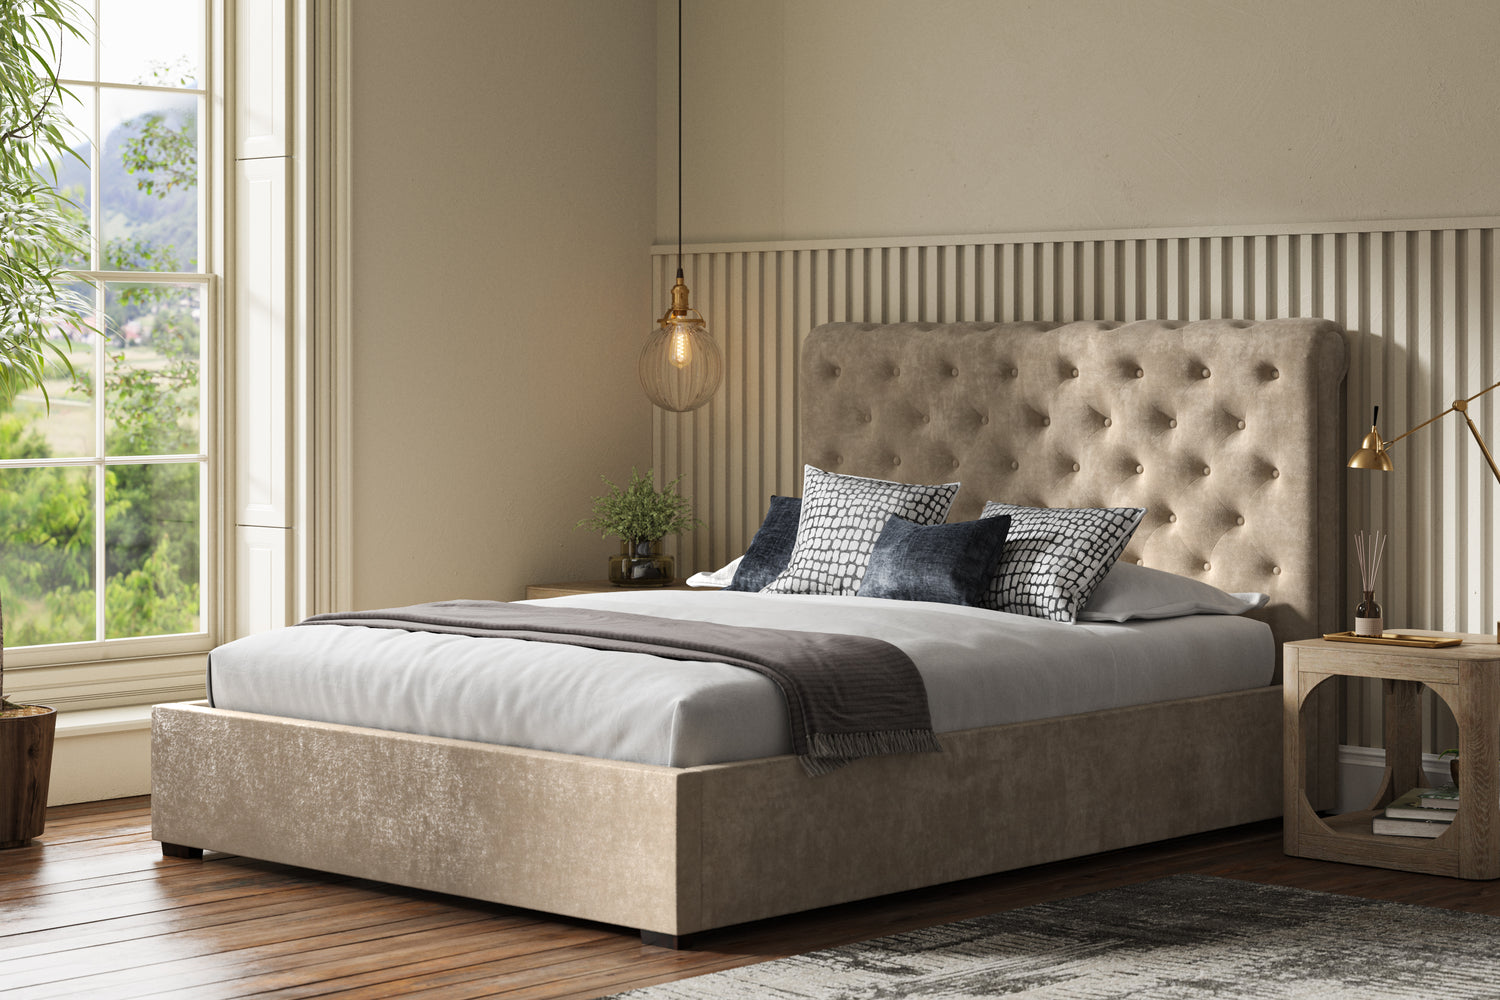 Emporia Beds Balmoral Scroll Ottoman Bed Stone-Better Bed Company